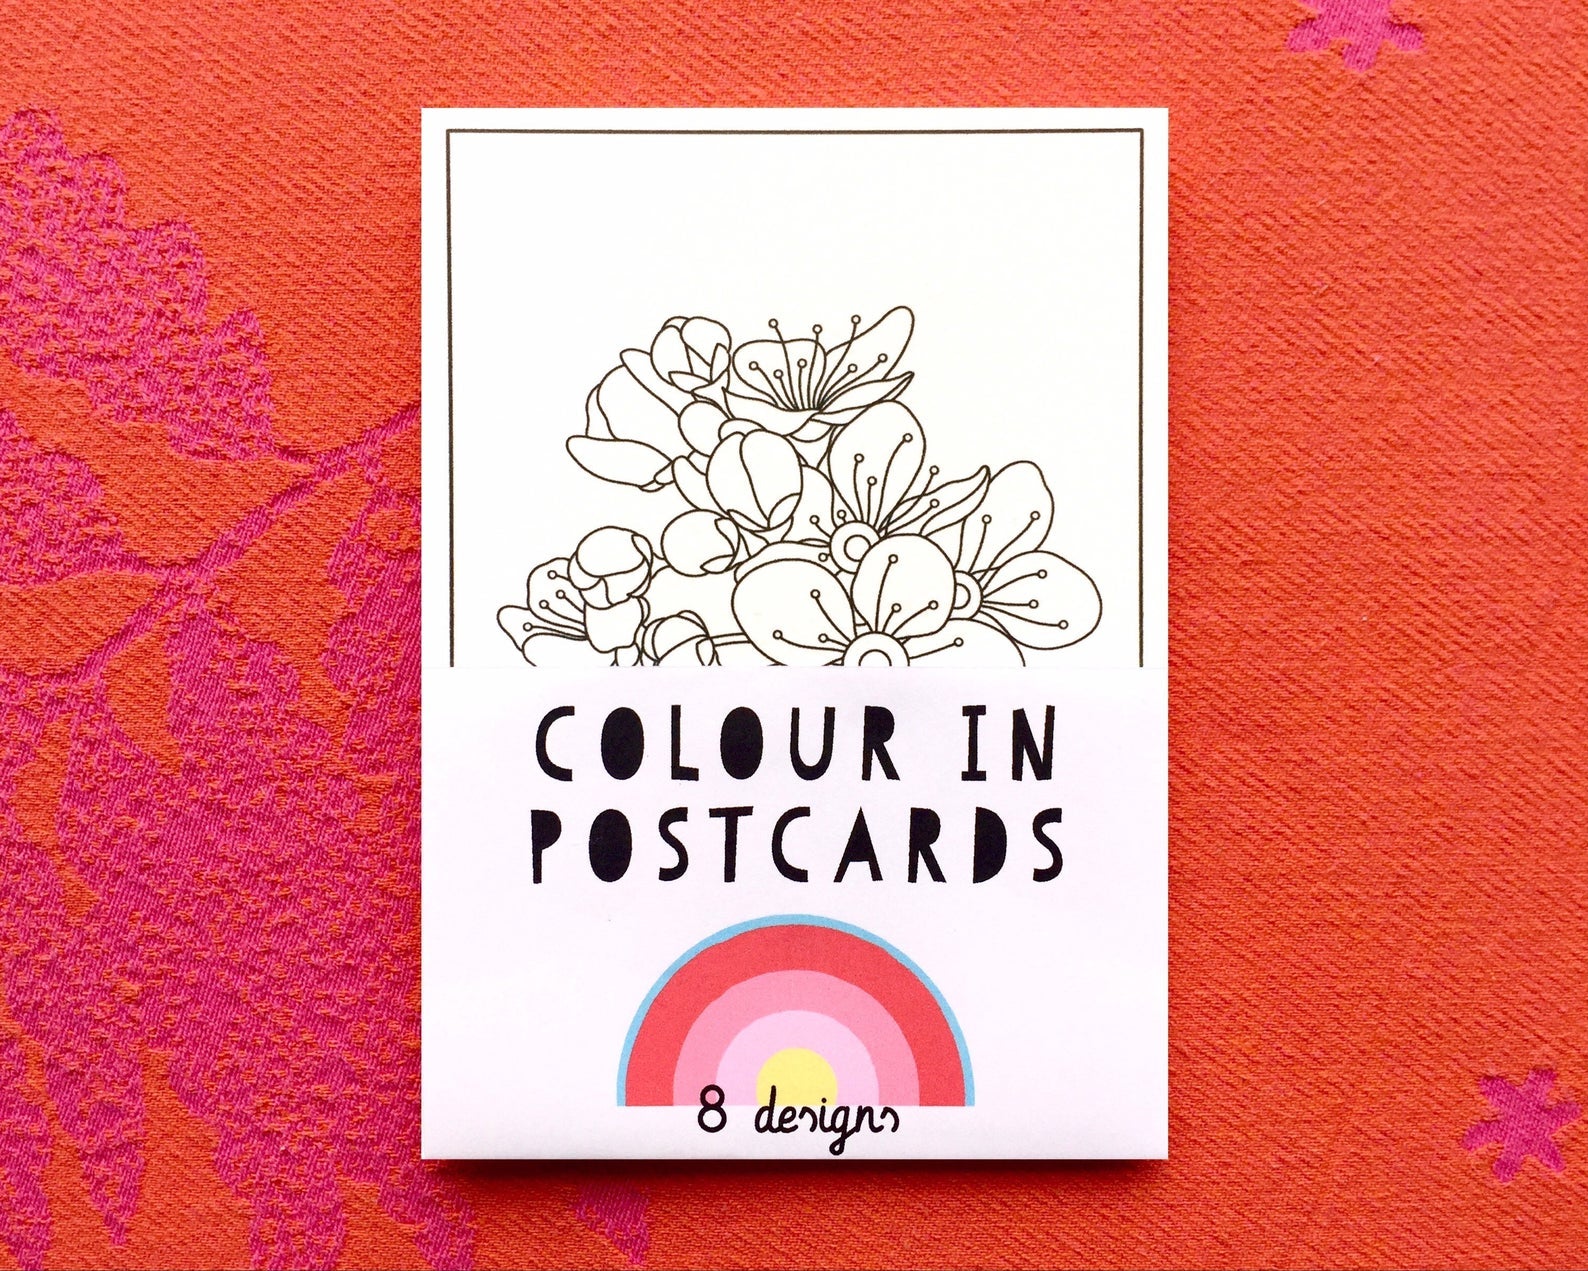 Colour In Postcards